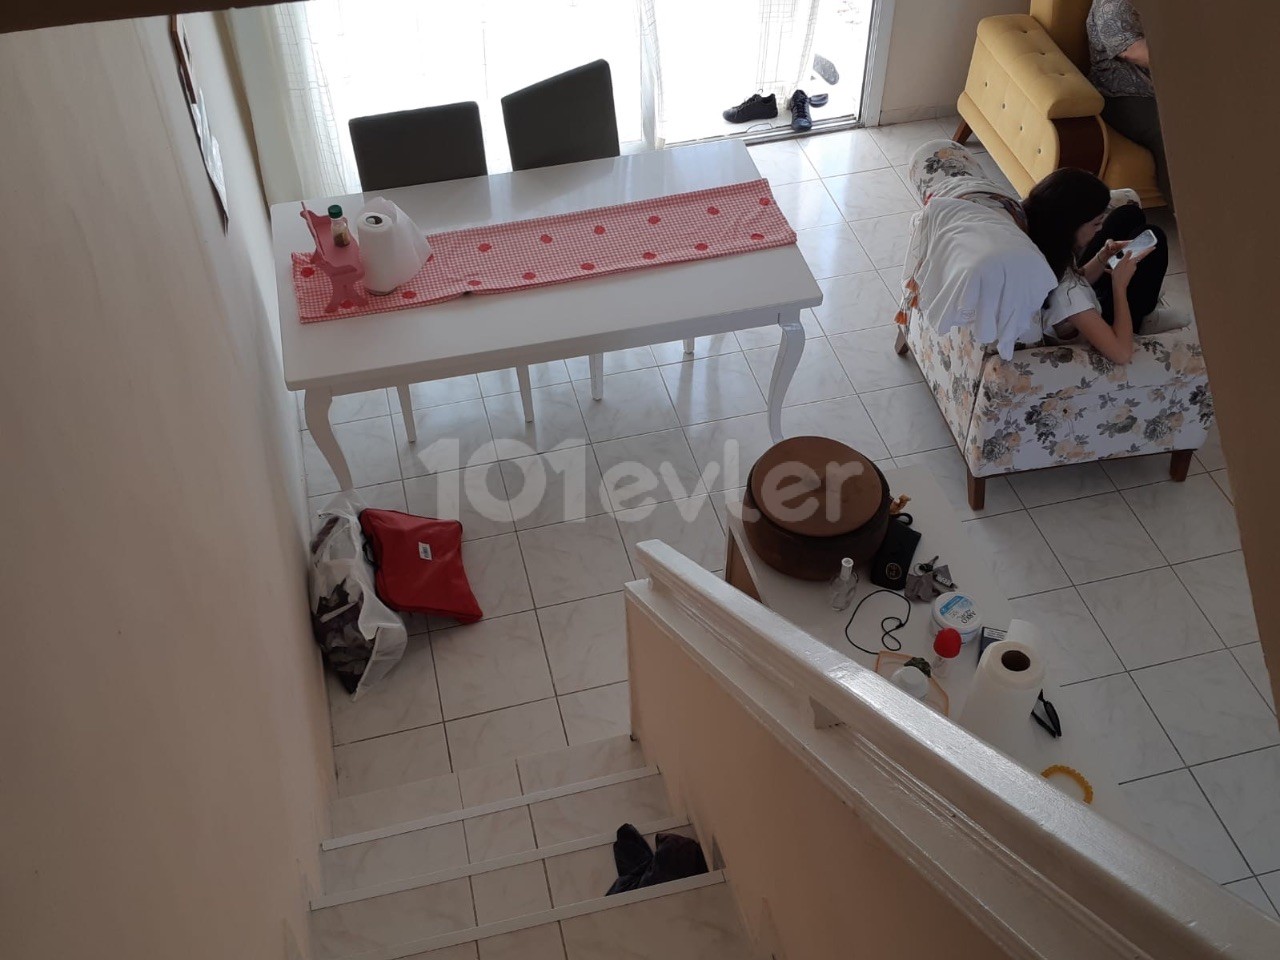 DETACHED FLAT FOR RENT WITH POOL AND MOUNTAIN VIEW IN ÇATALKÖY, GİRNE